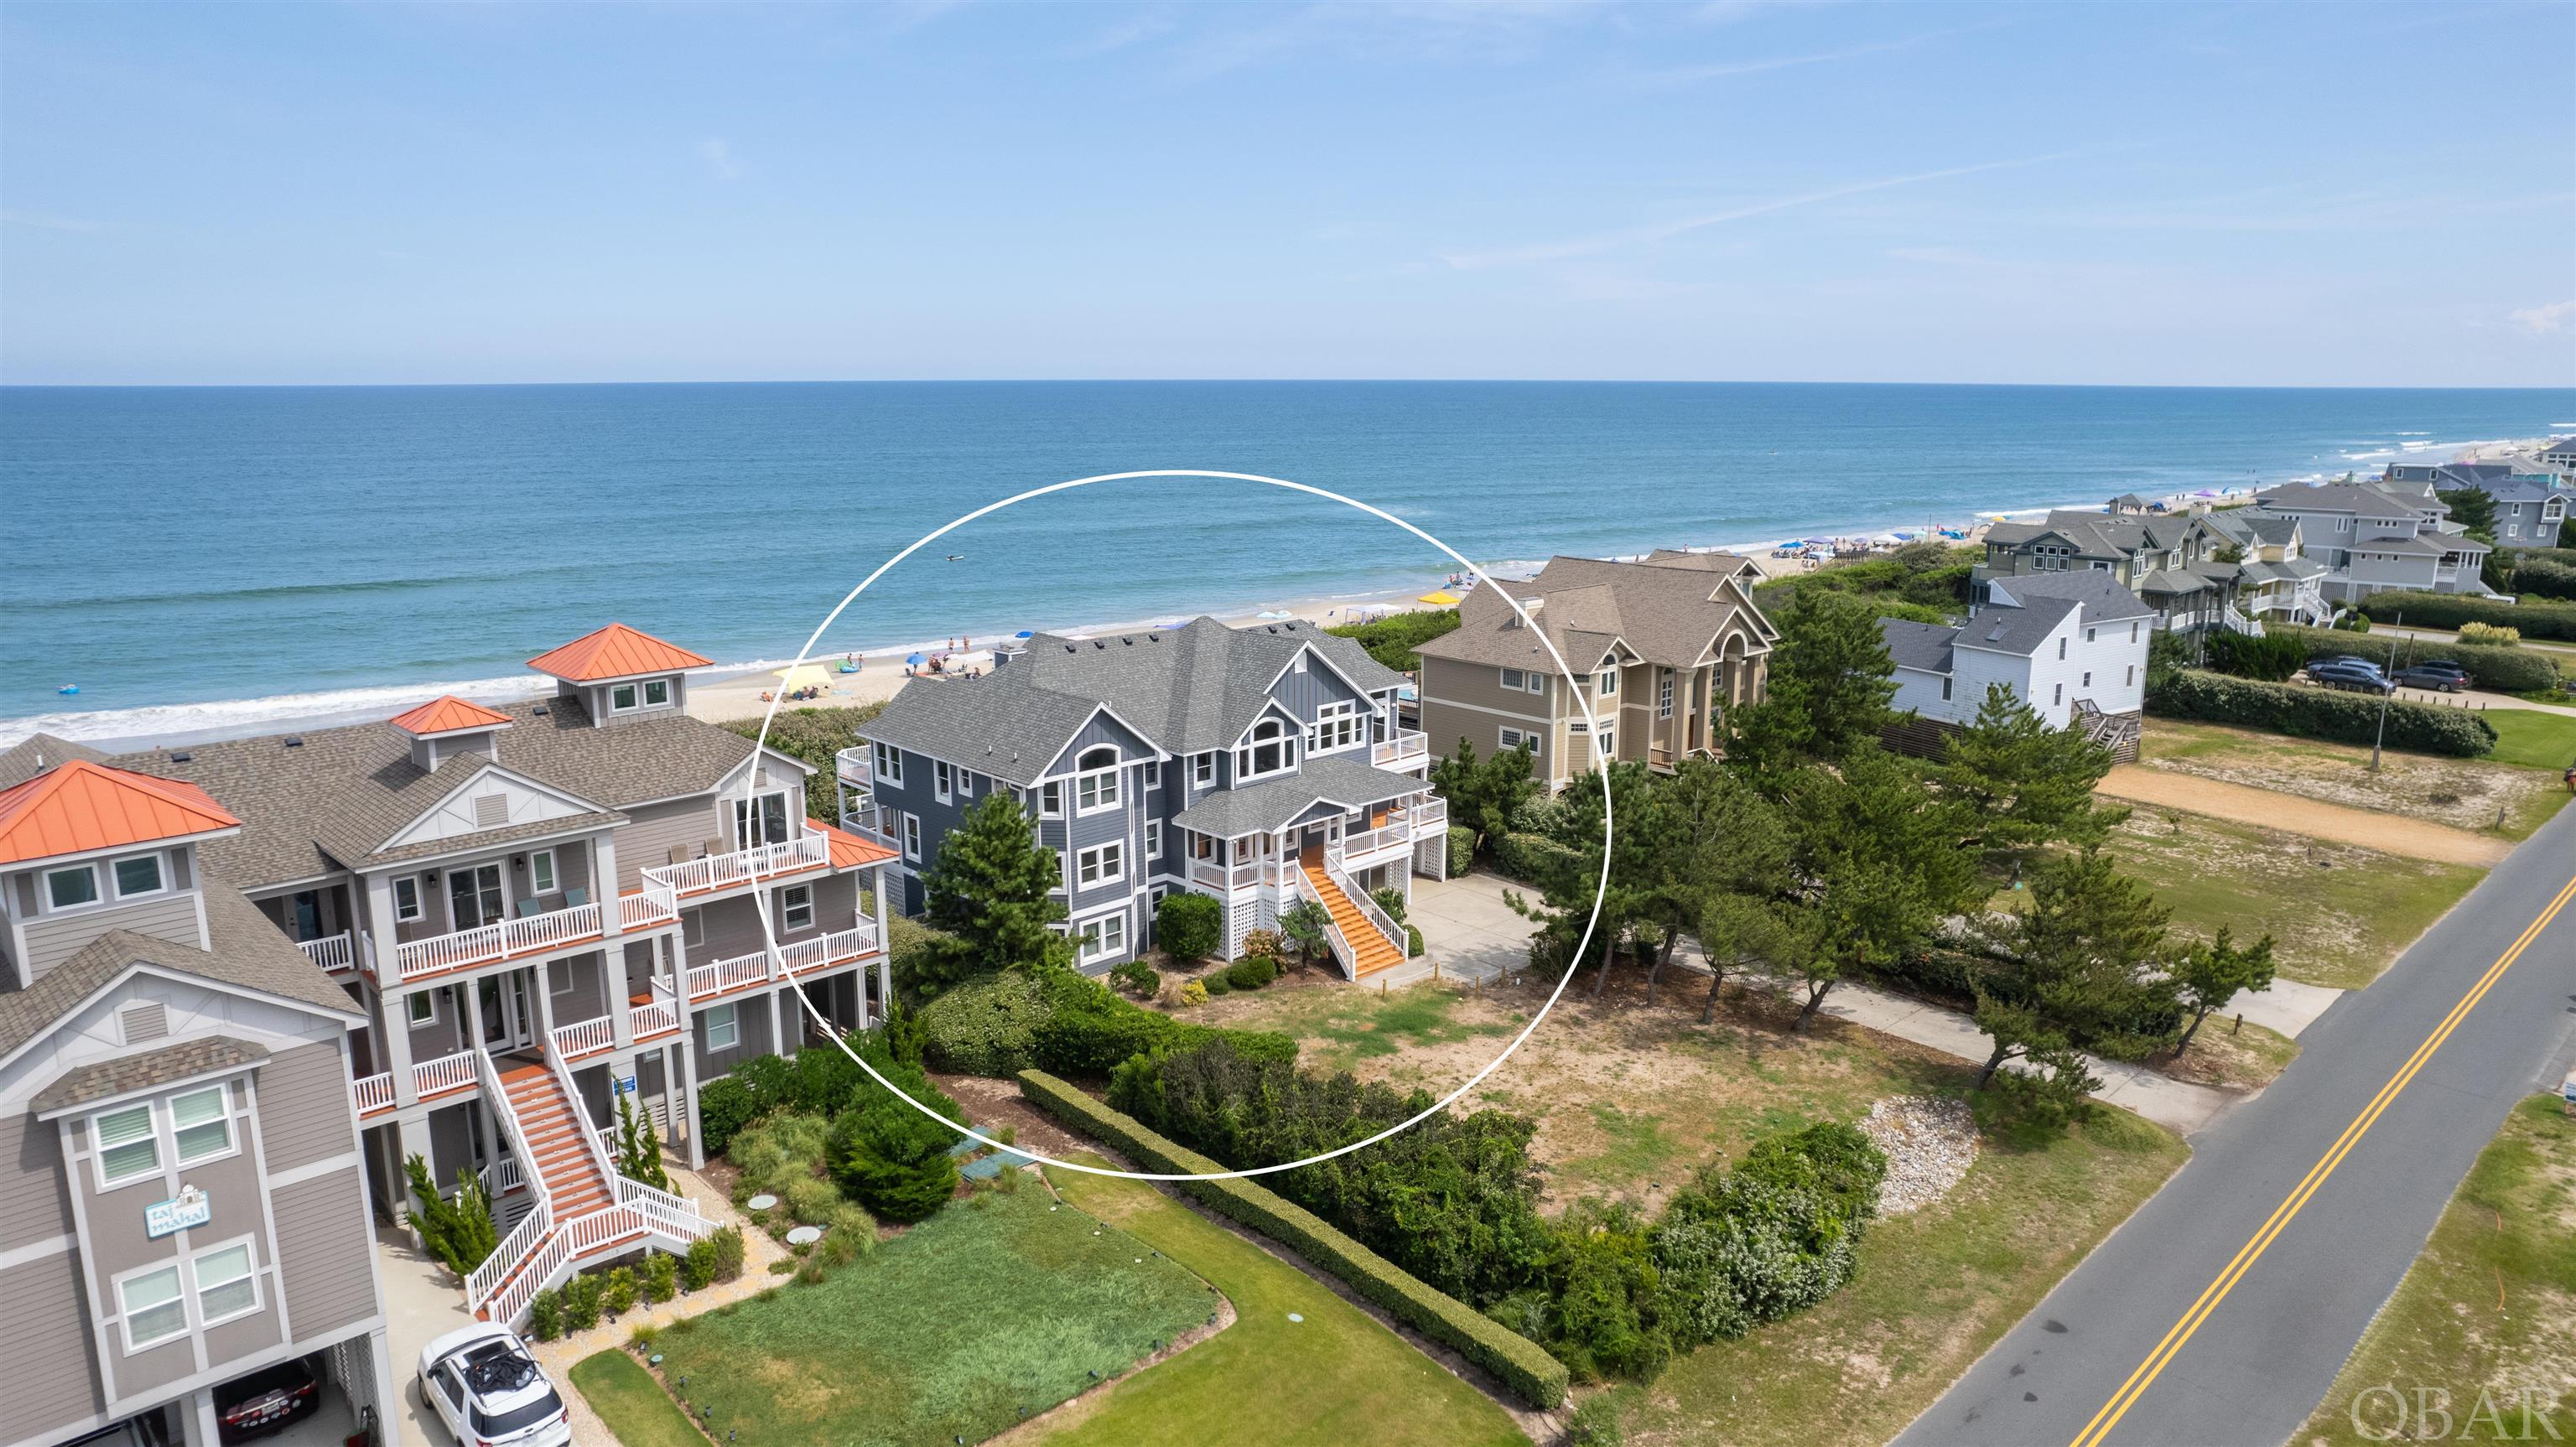 1083 Lighthouse Drive, Corolla, NC 27927, 6 Bedrooms Bedrooms, ,5 BathroomsBathrooms,Residential,For sale,Lighthouse Drive,123153